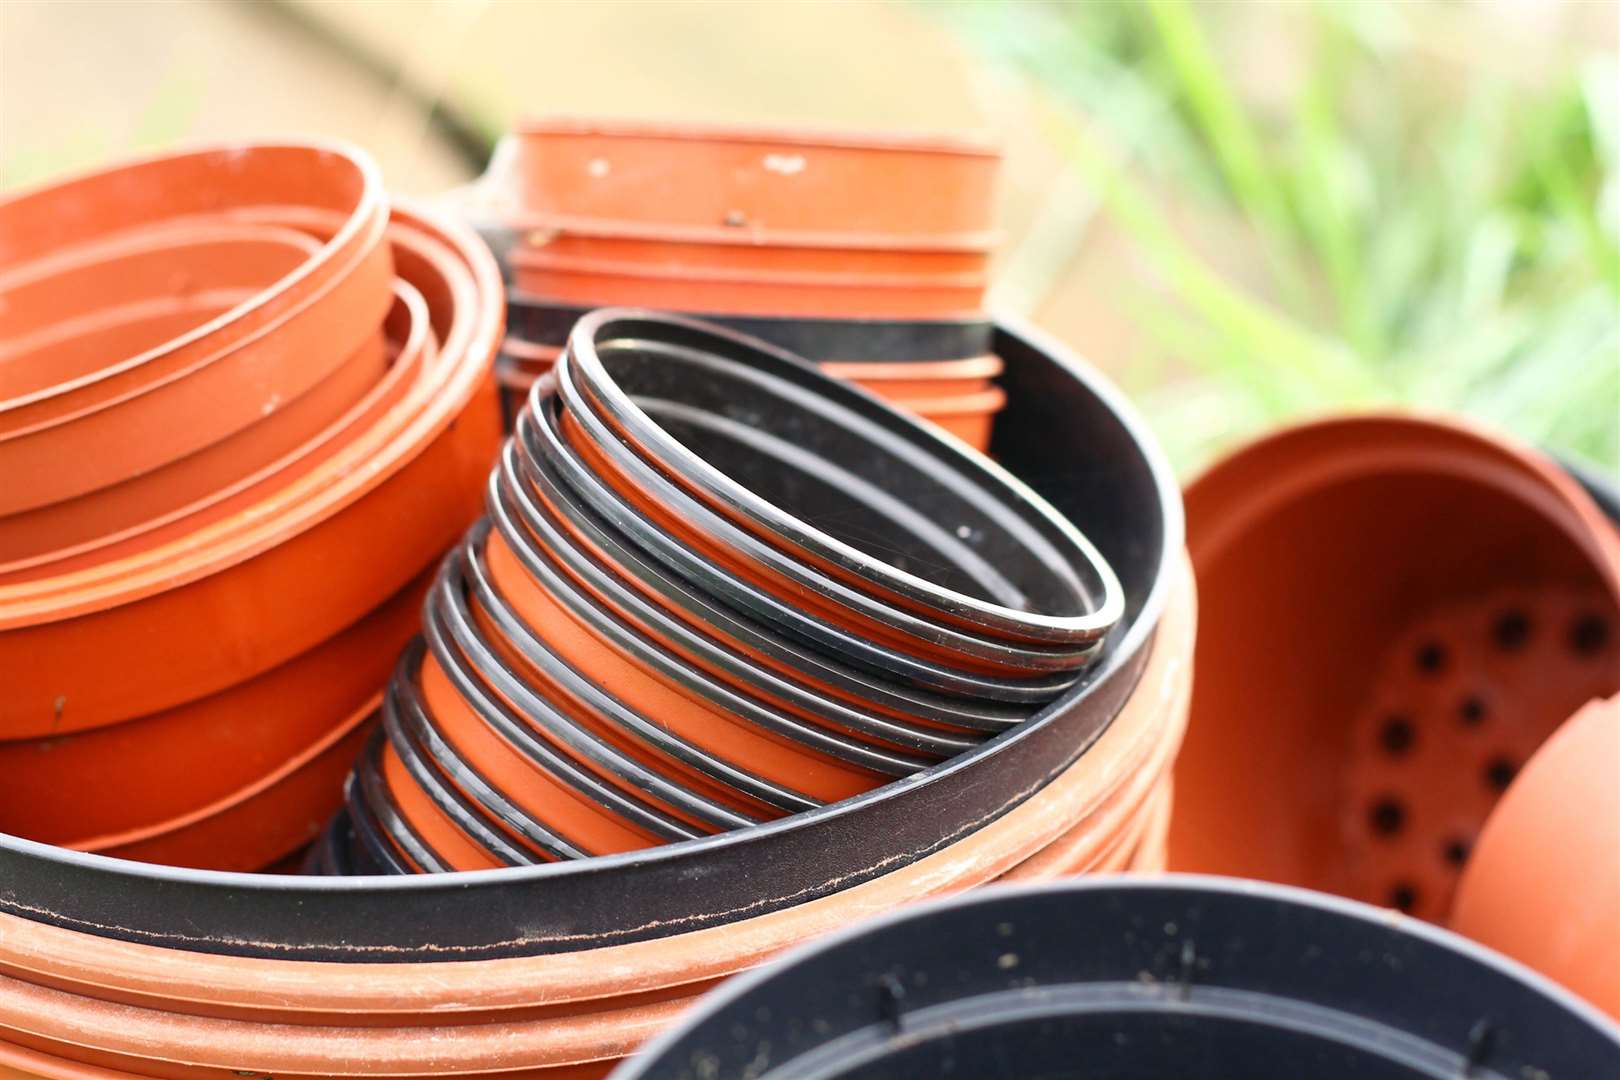 Plastic gardening products can take up to 450 years to biodegrade. Picture: iStock/PA